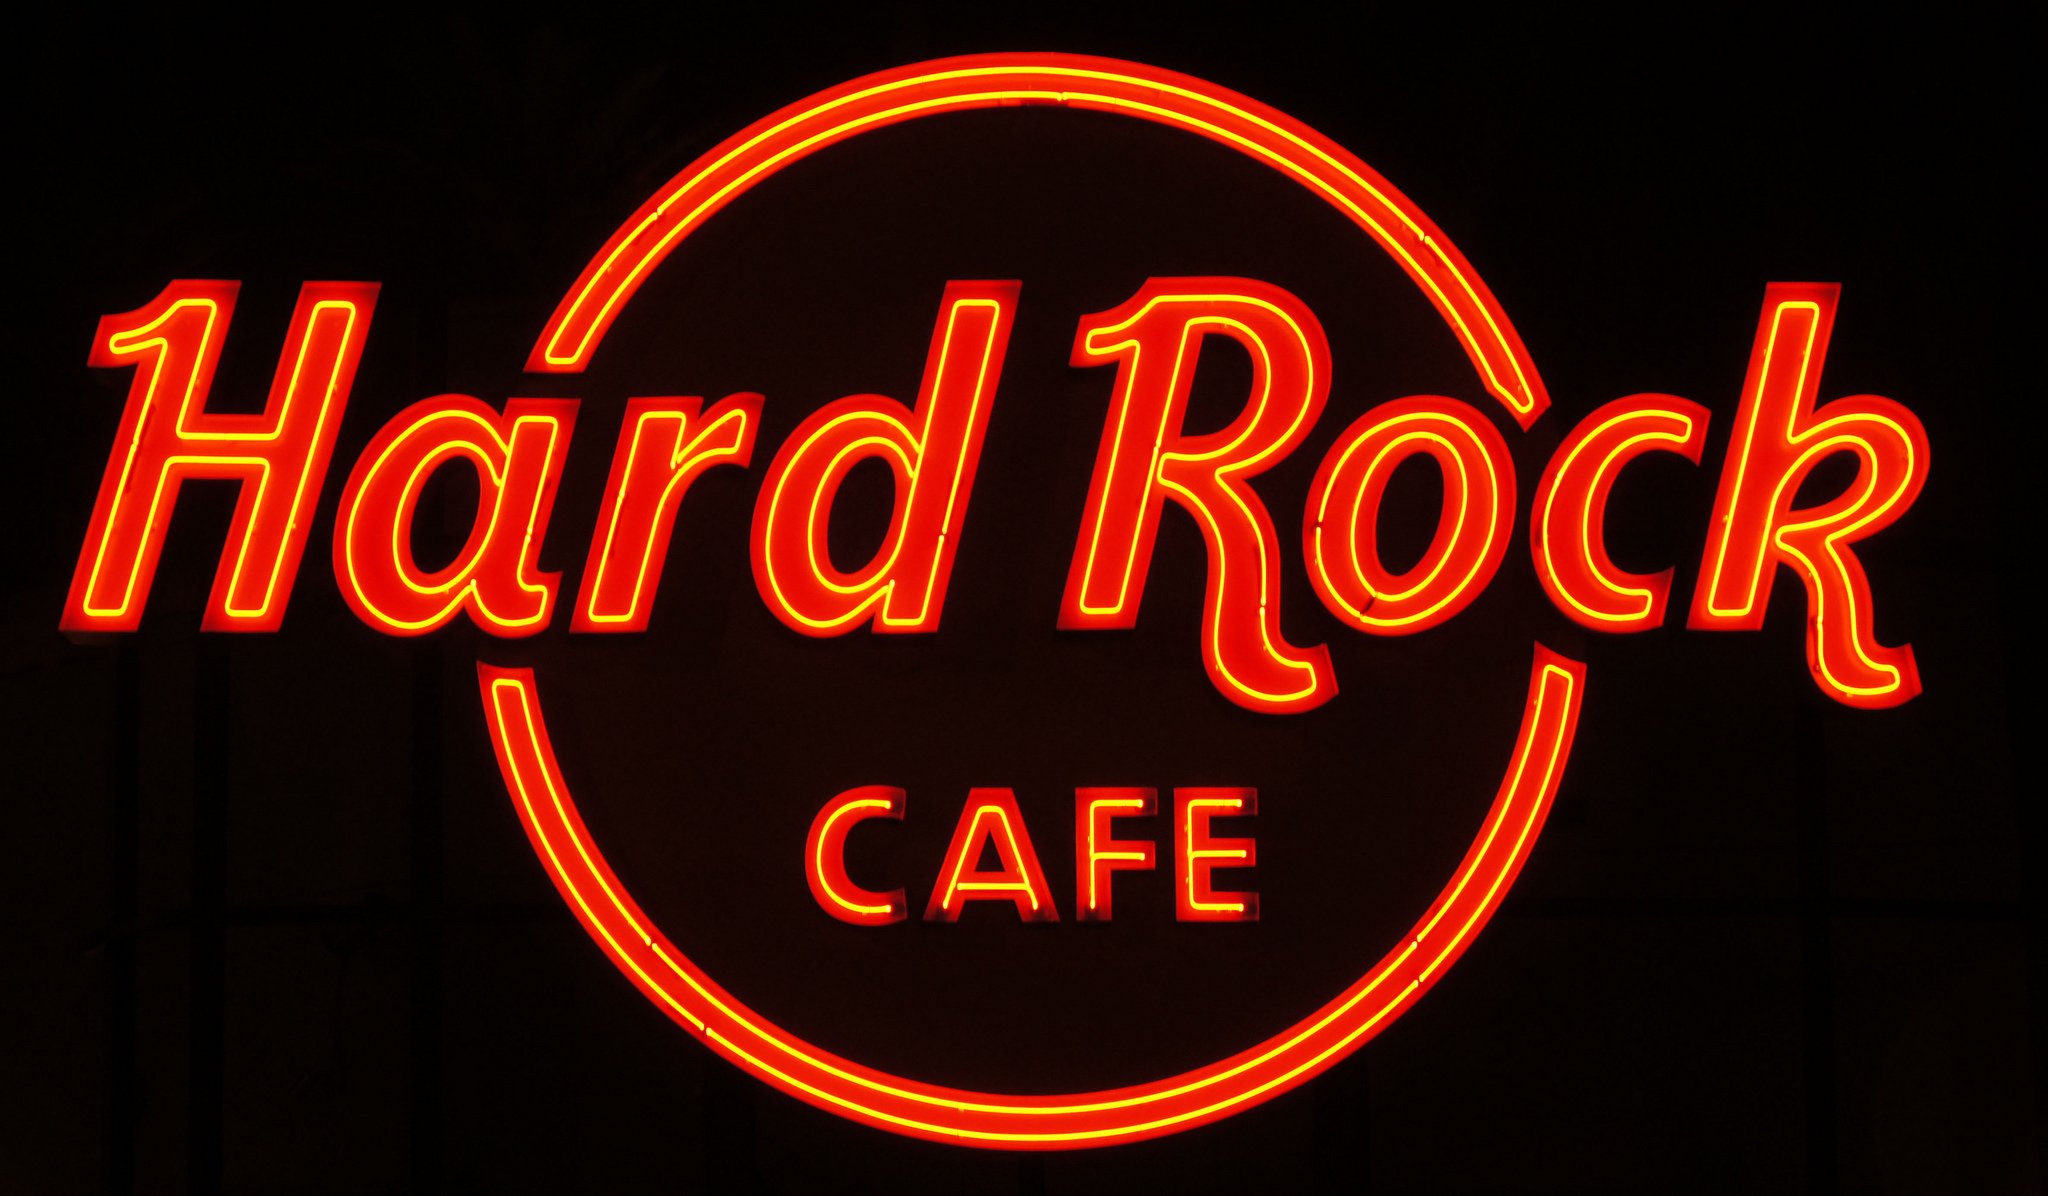 hard rock wallpaper,electronic signage,neon sign,font,neon,text